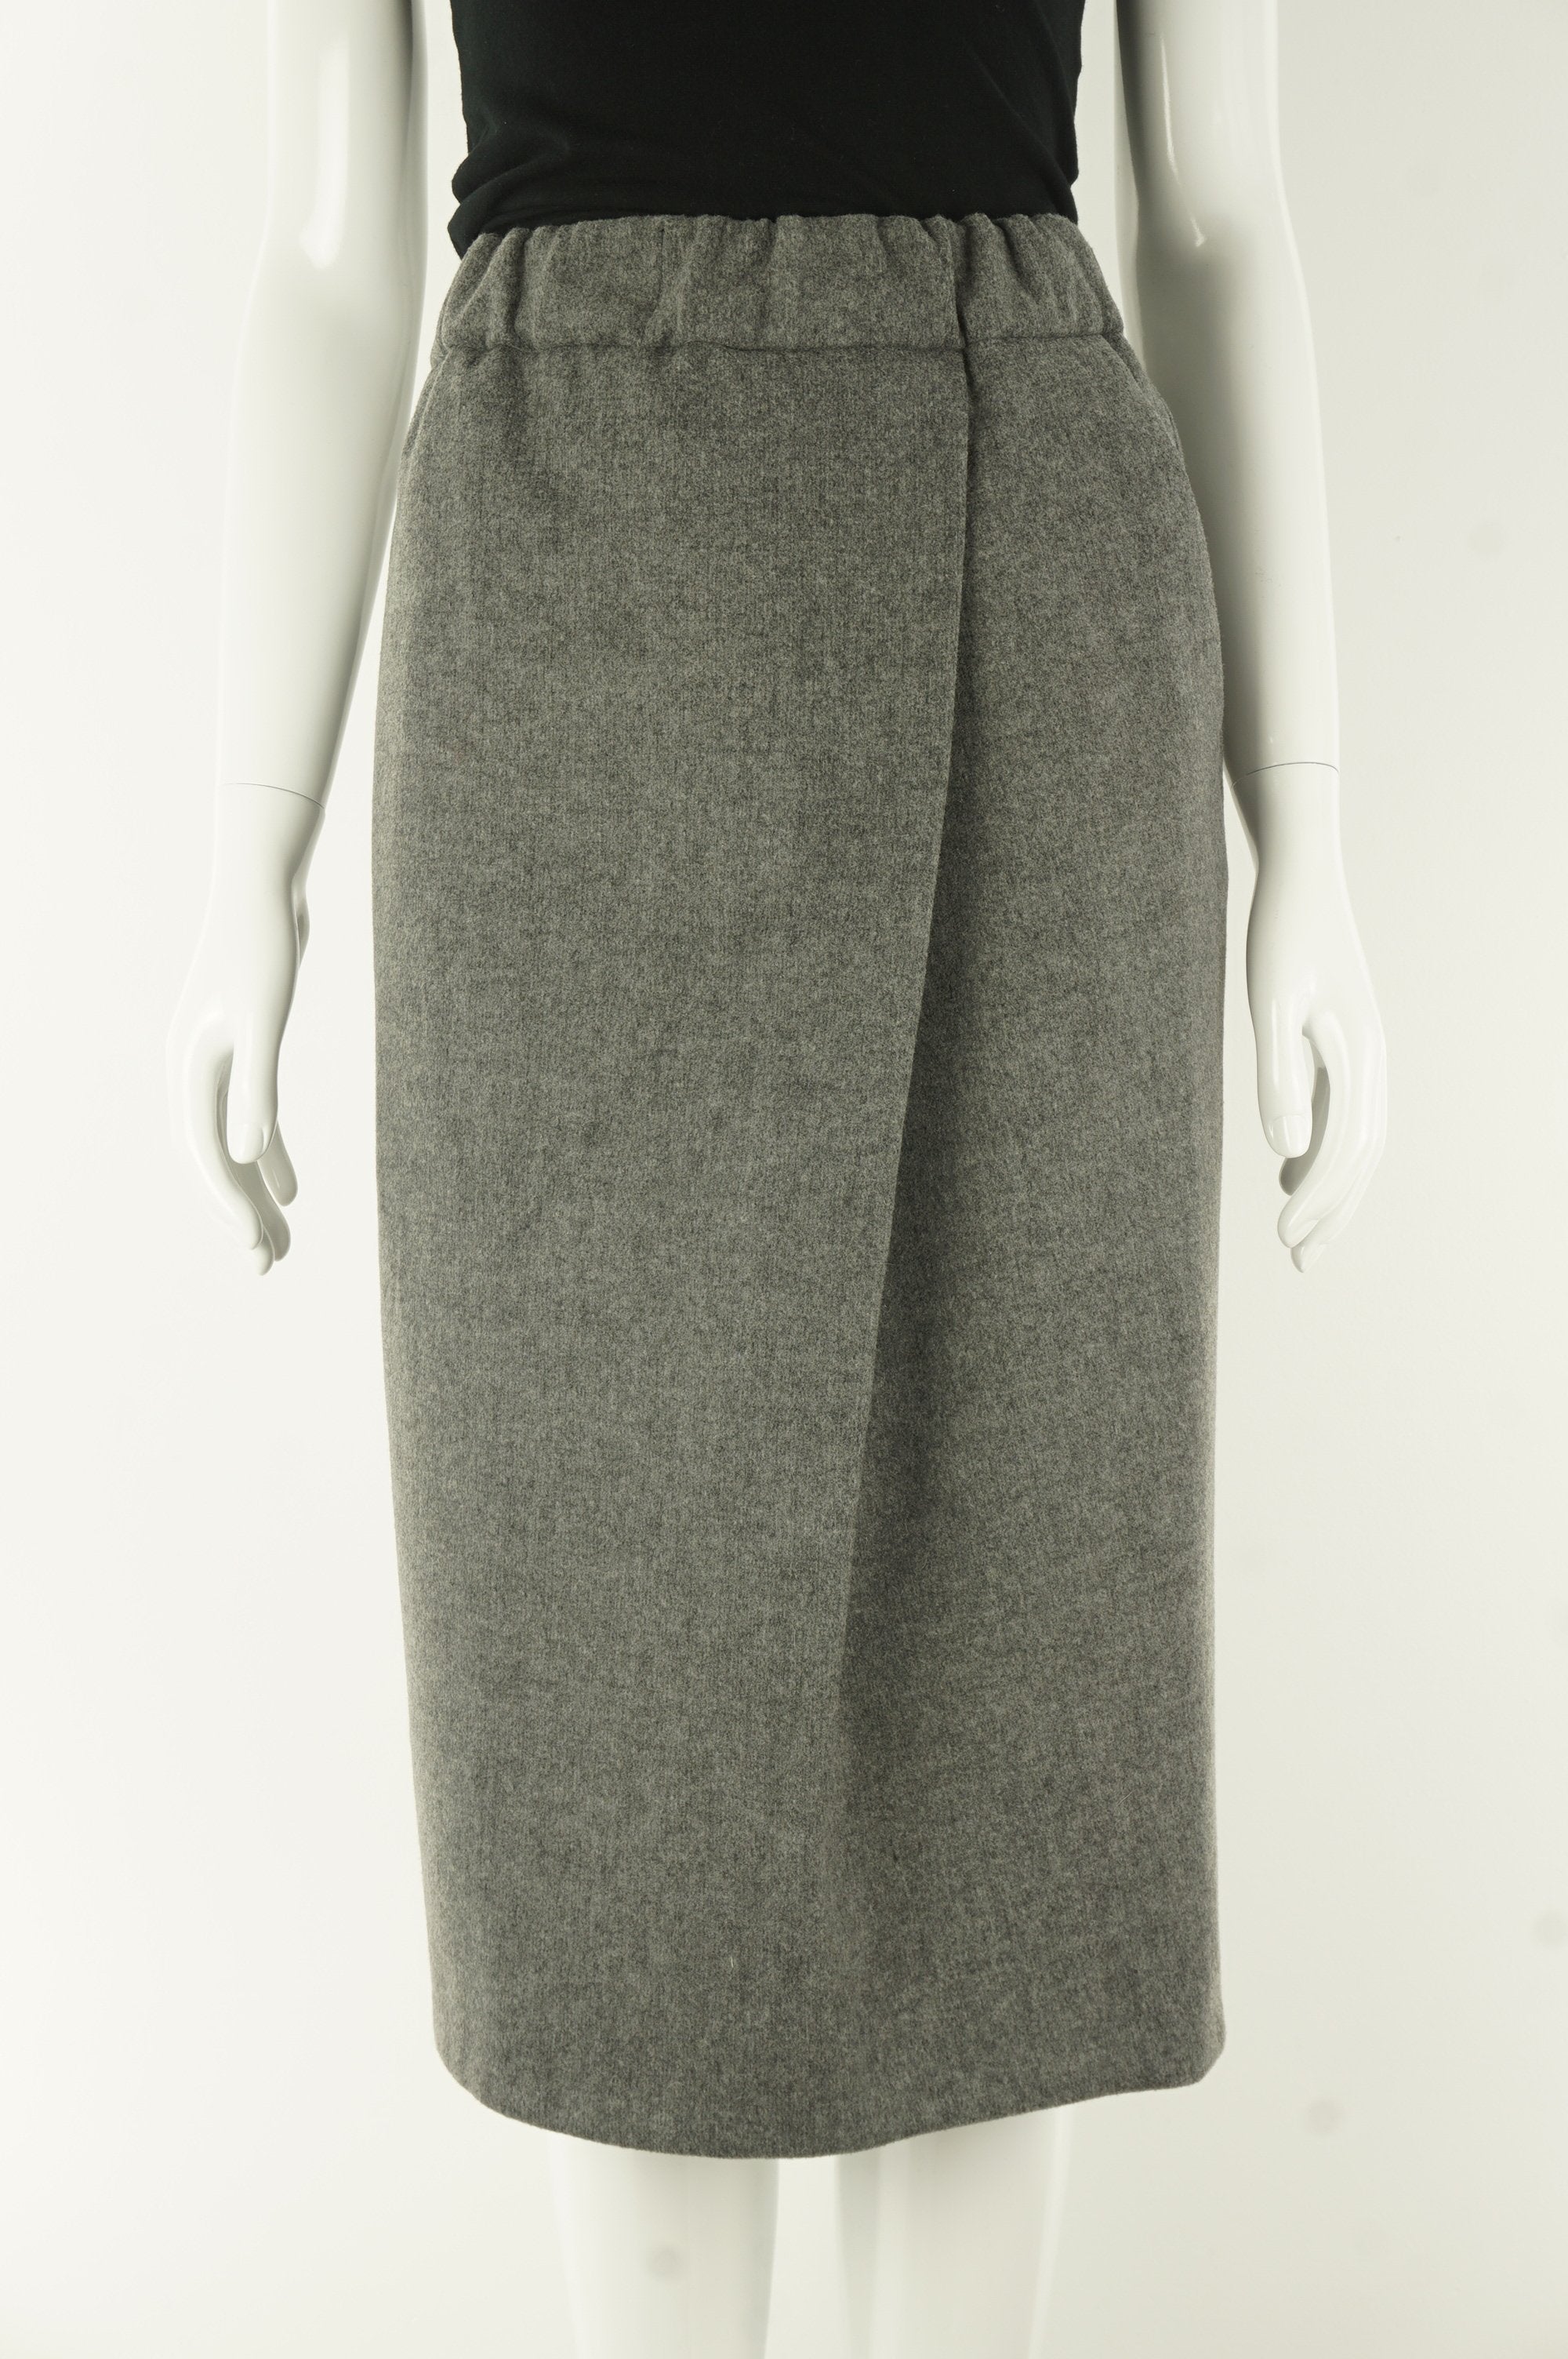 Le Fou Wilfred Wool Winter Pencil Skirt, Sitting in the office the whole day but still have to embrace the cold while walking to lunch? This wool skirt covers it all. Not even mentioning the comfortable elastic waistband!, Grey, 43% Polyester, 22% wool, 19% viscose, 7% polyamide, 6% cotton, 3% elastane, women's Skirts & Shorts, women's Grey Skirts & Shorts, Le Fou Wilfred women's Skirts & Shorts, women's winter warm wrap skirt, Aritzia women's wool wrap skirt